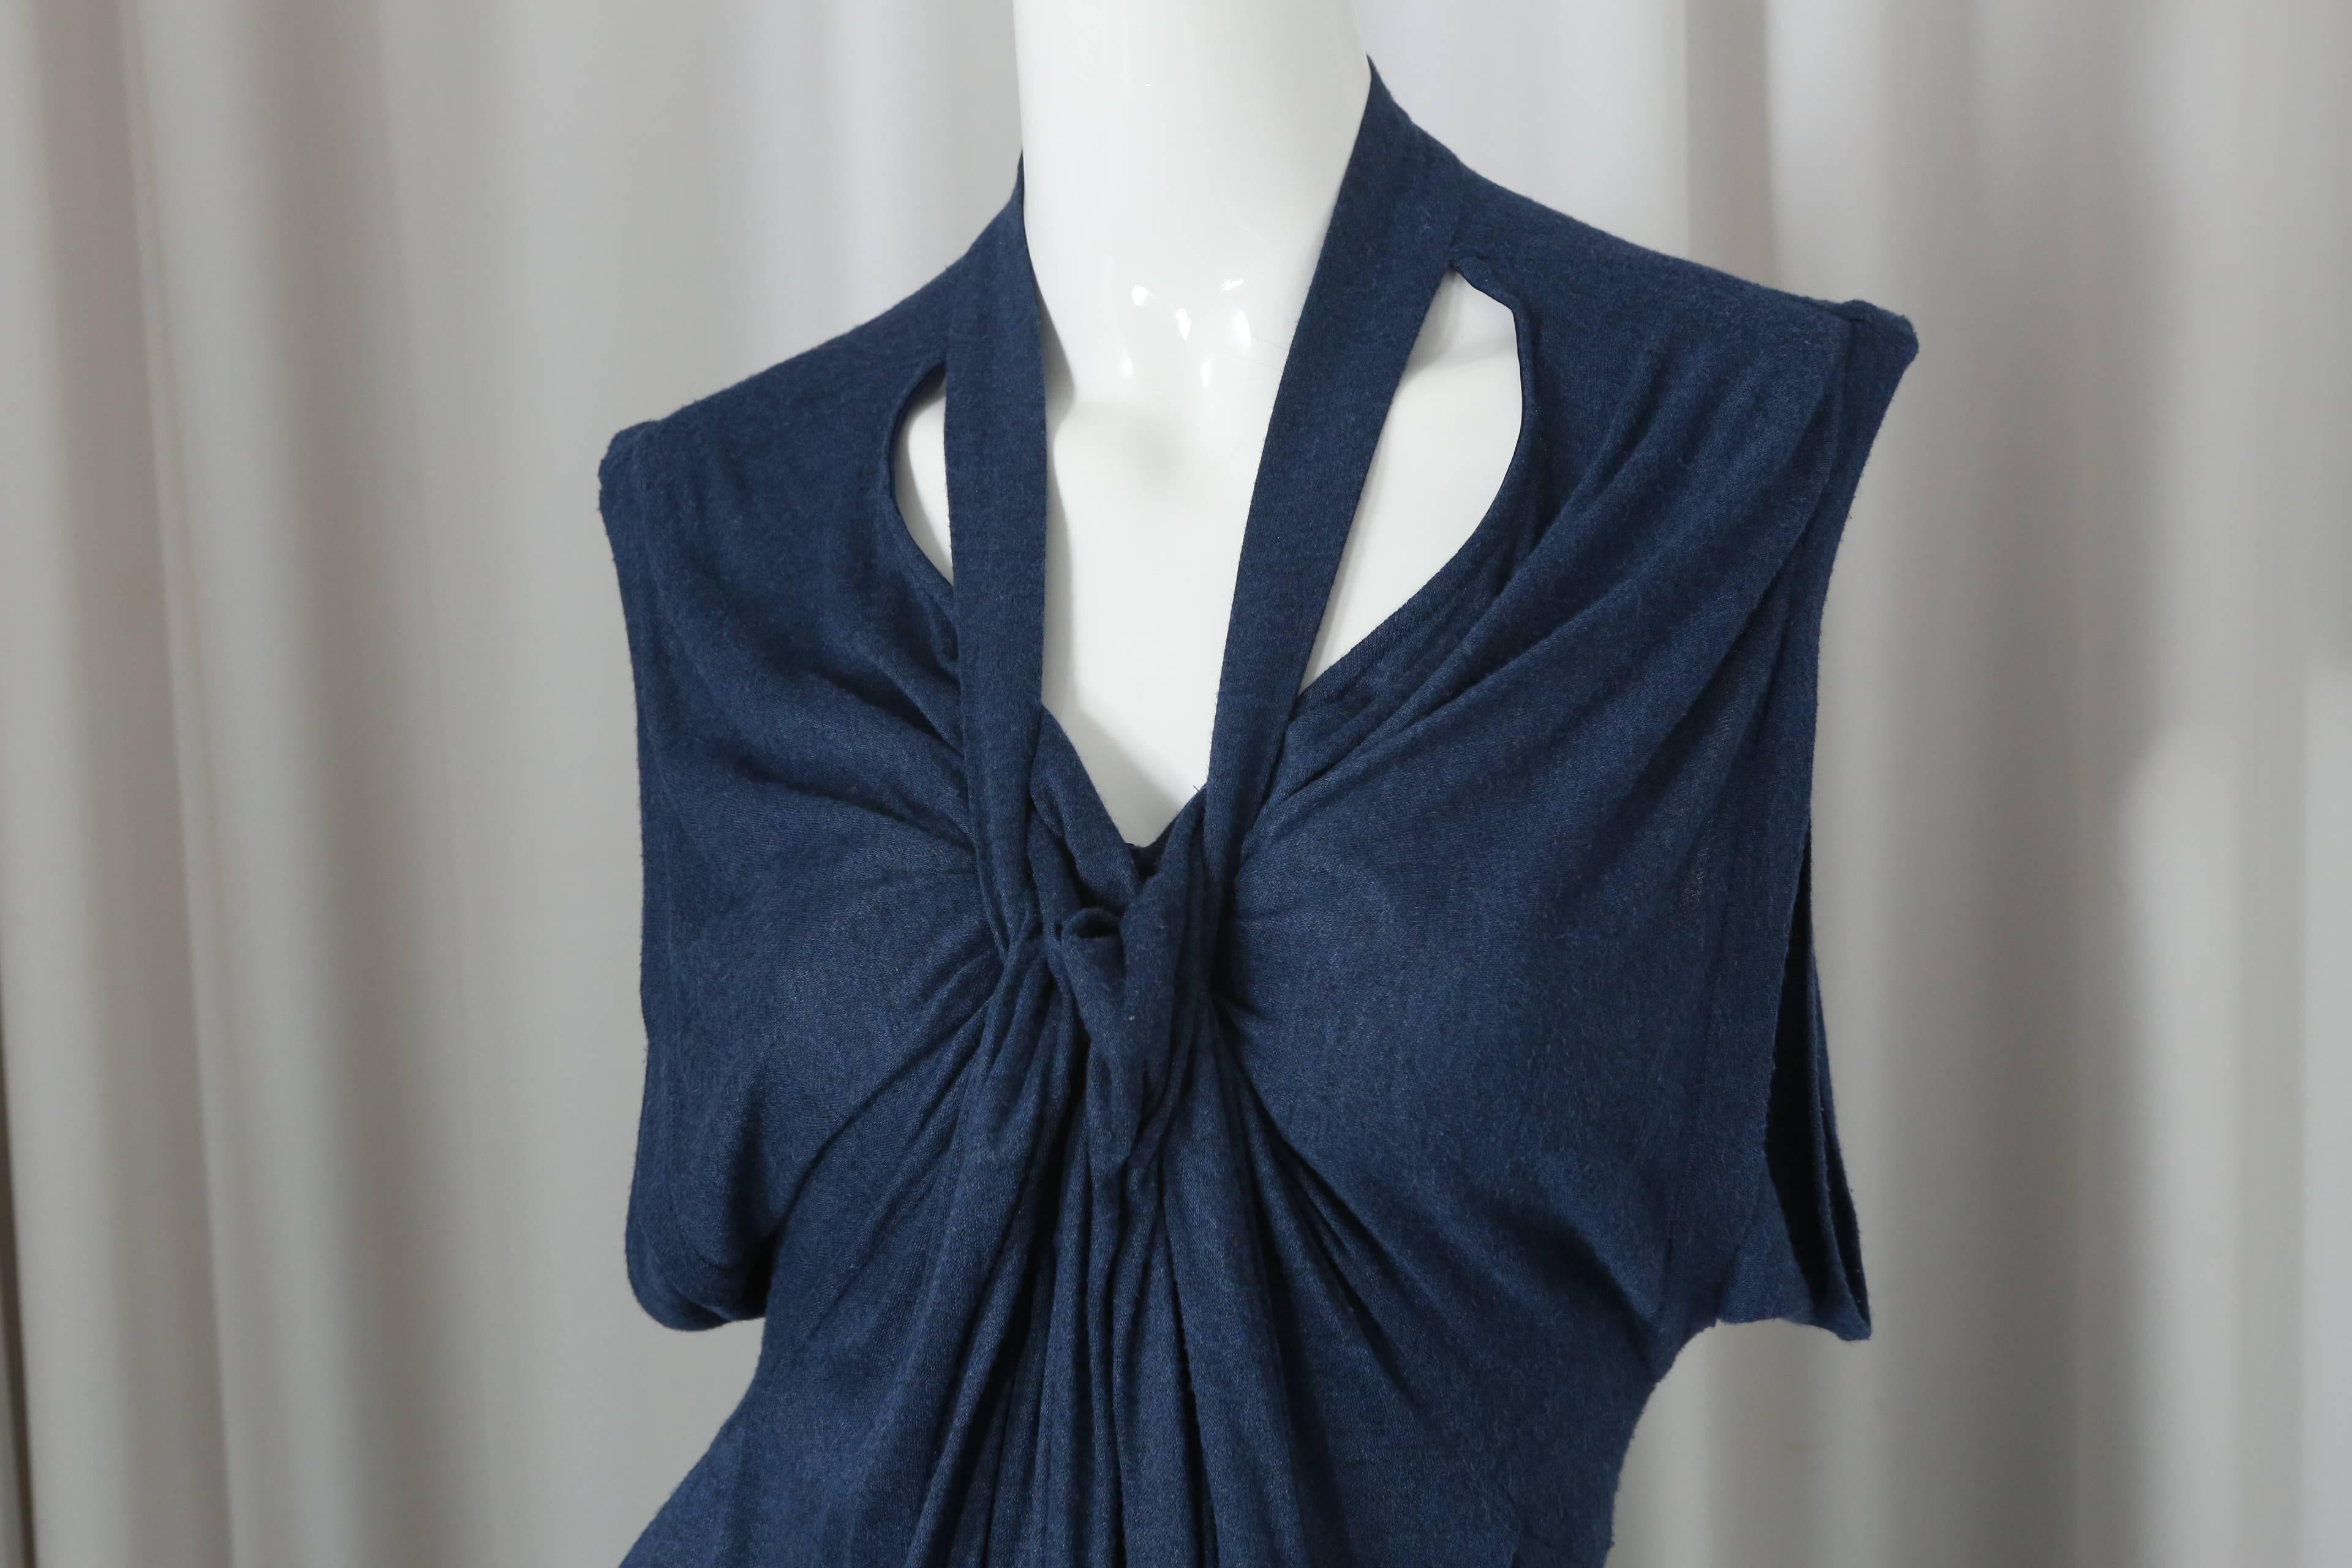 YSL blue sleeveless dress with front knot, exposure at neckline and back scallop detail.